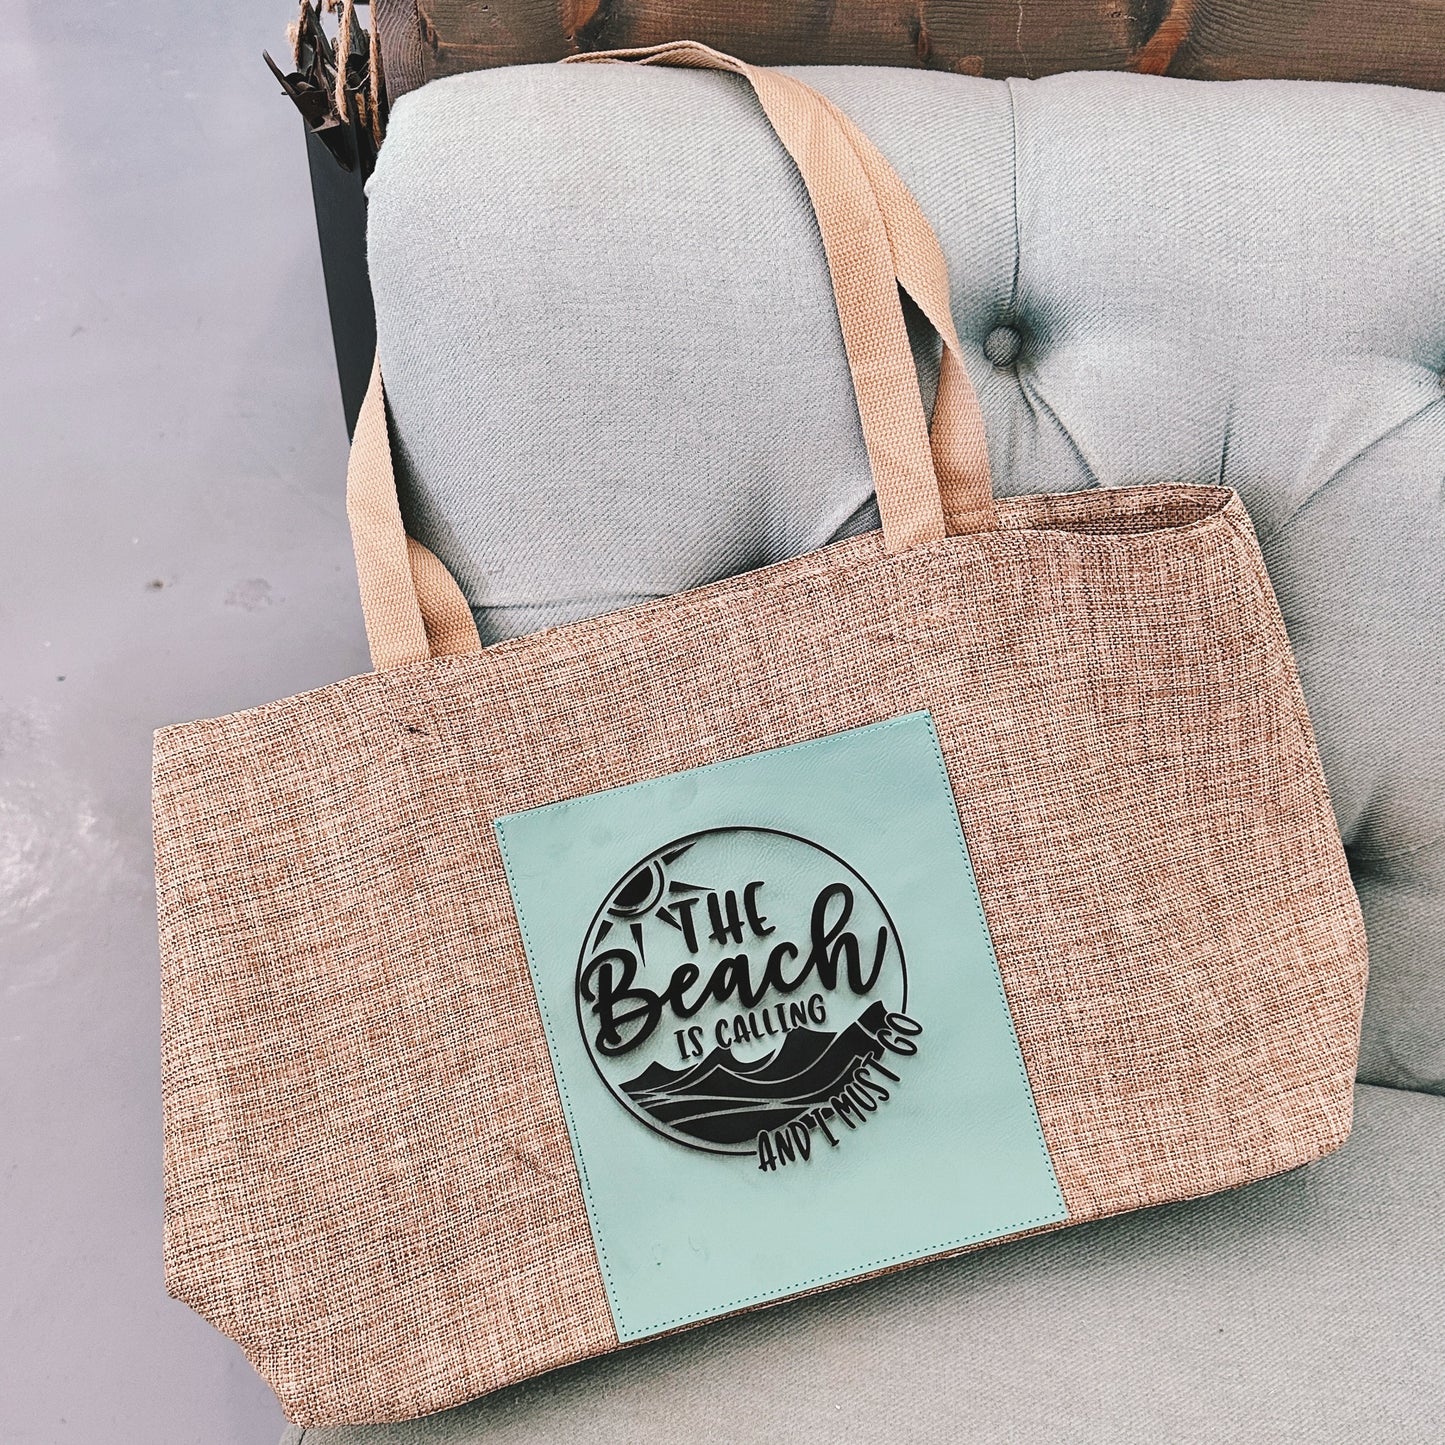 The Beach IS Calling and I Must Go 20x12" Burlap Bag